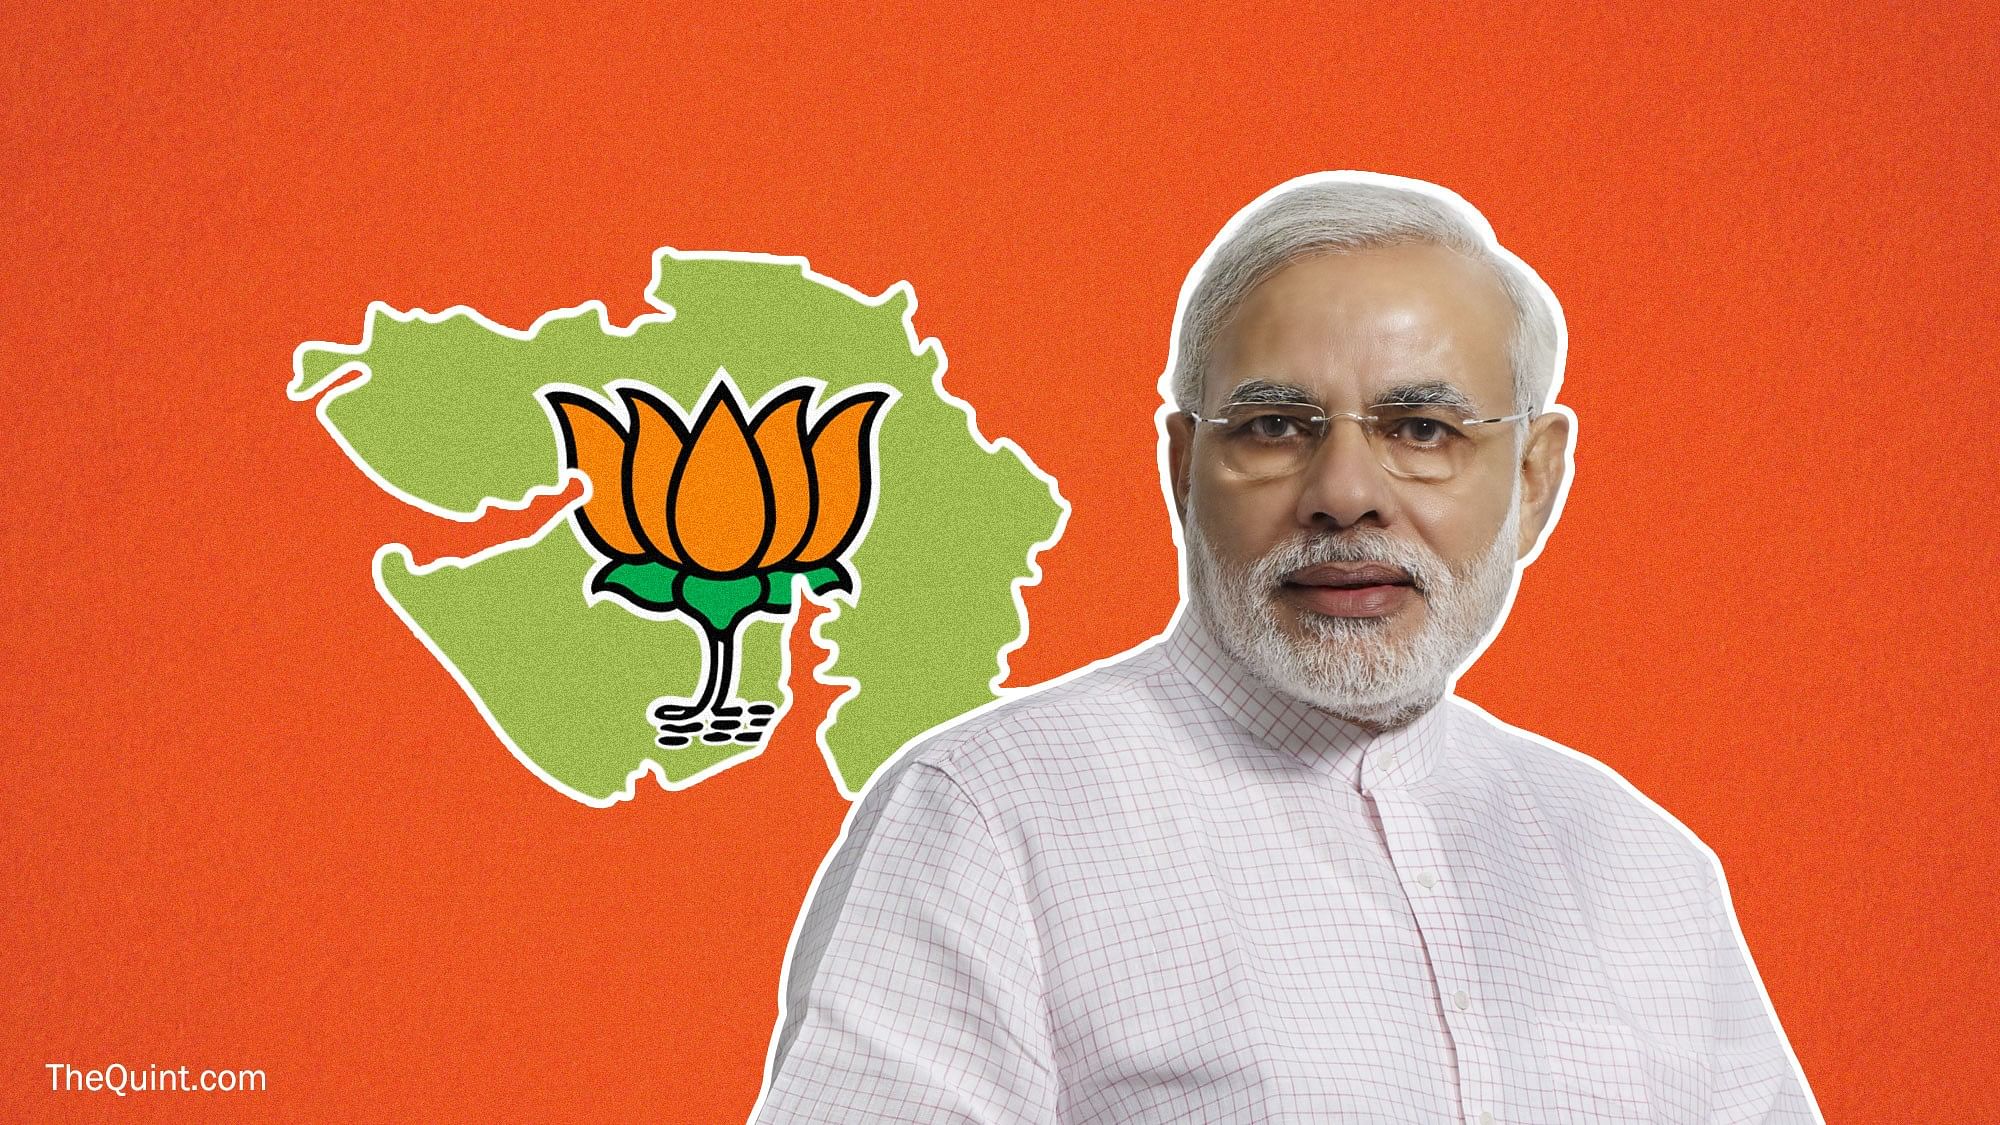 There are the 10 cards that the BJP can play to ensure Narendra Modi continues as India’s Prime Minister.